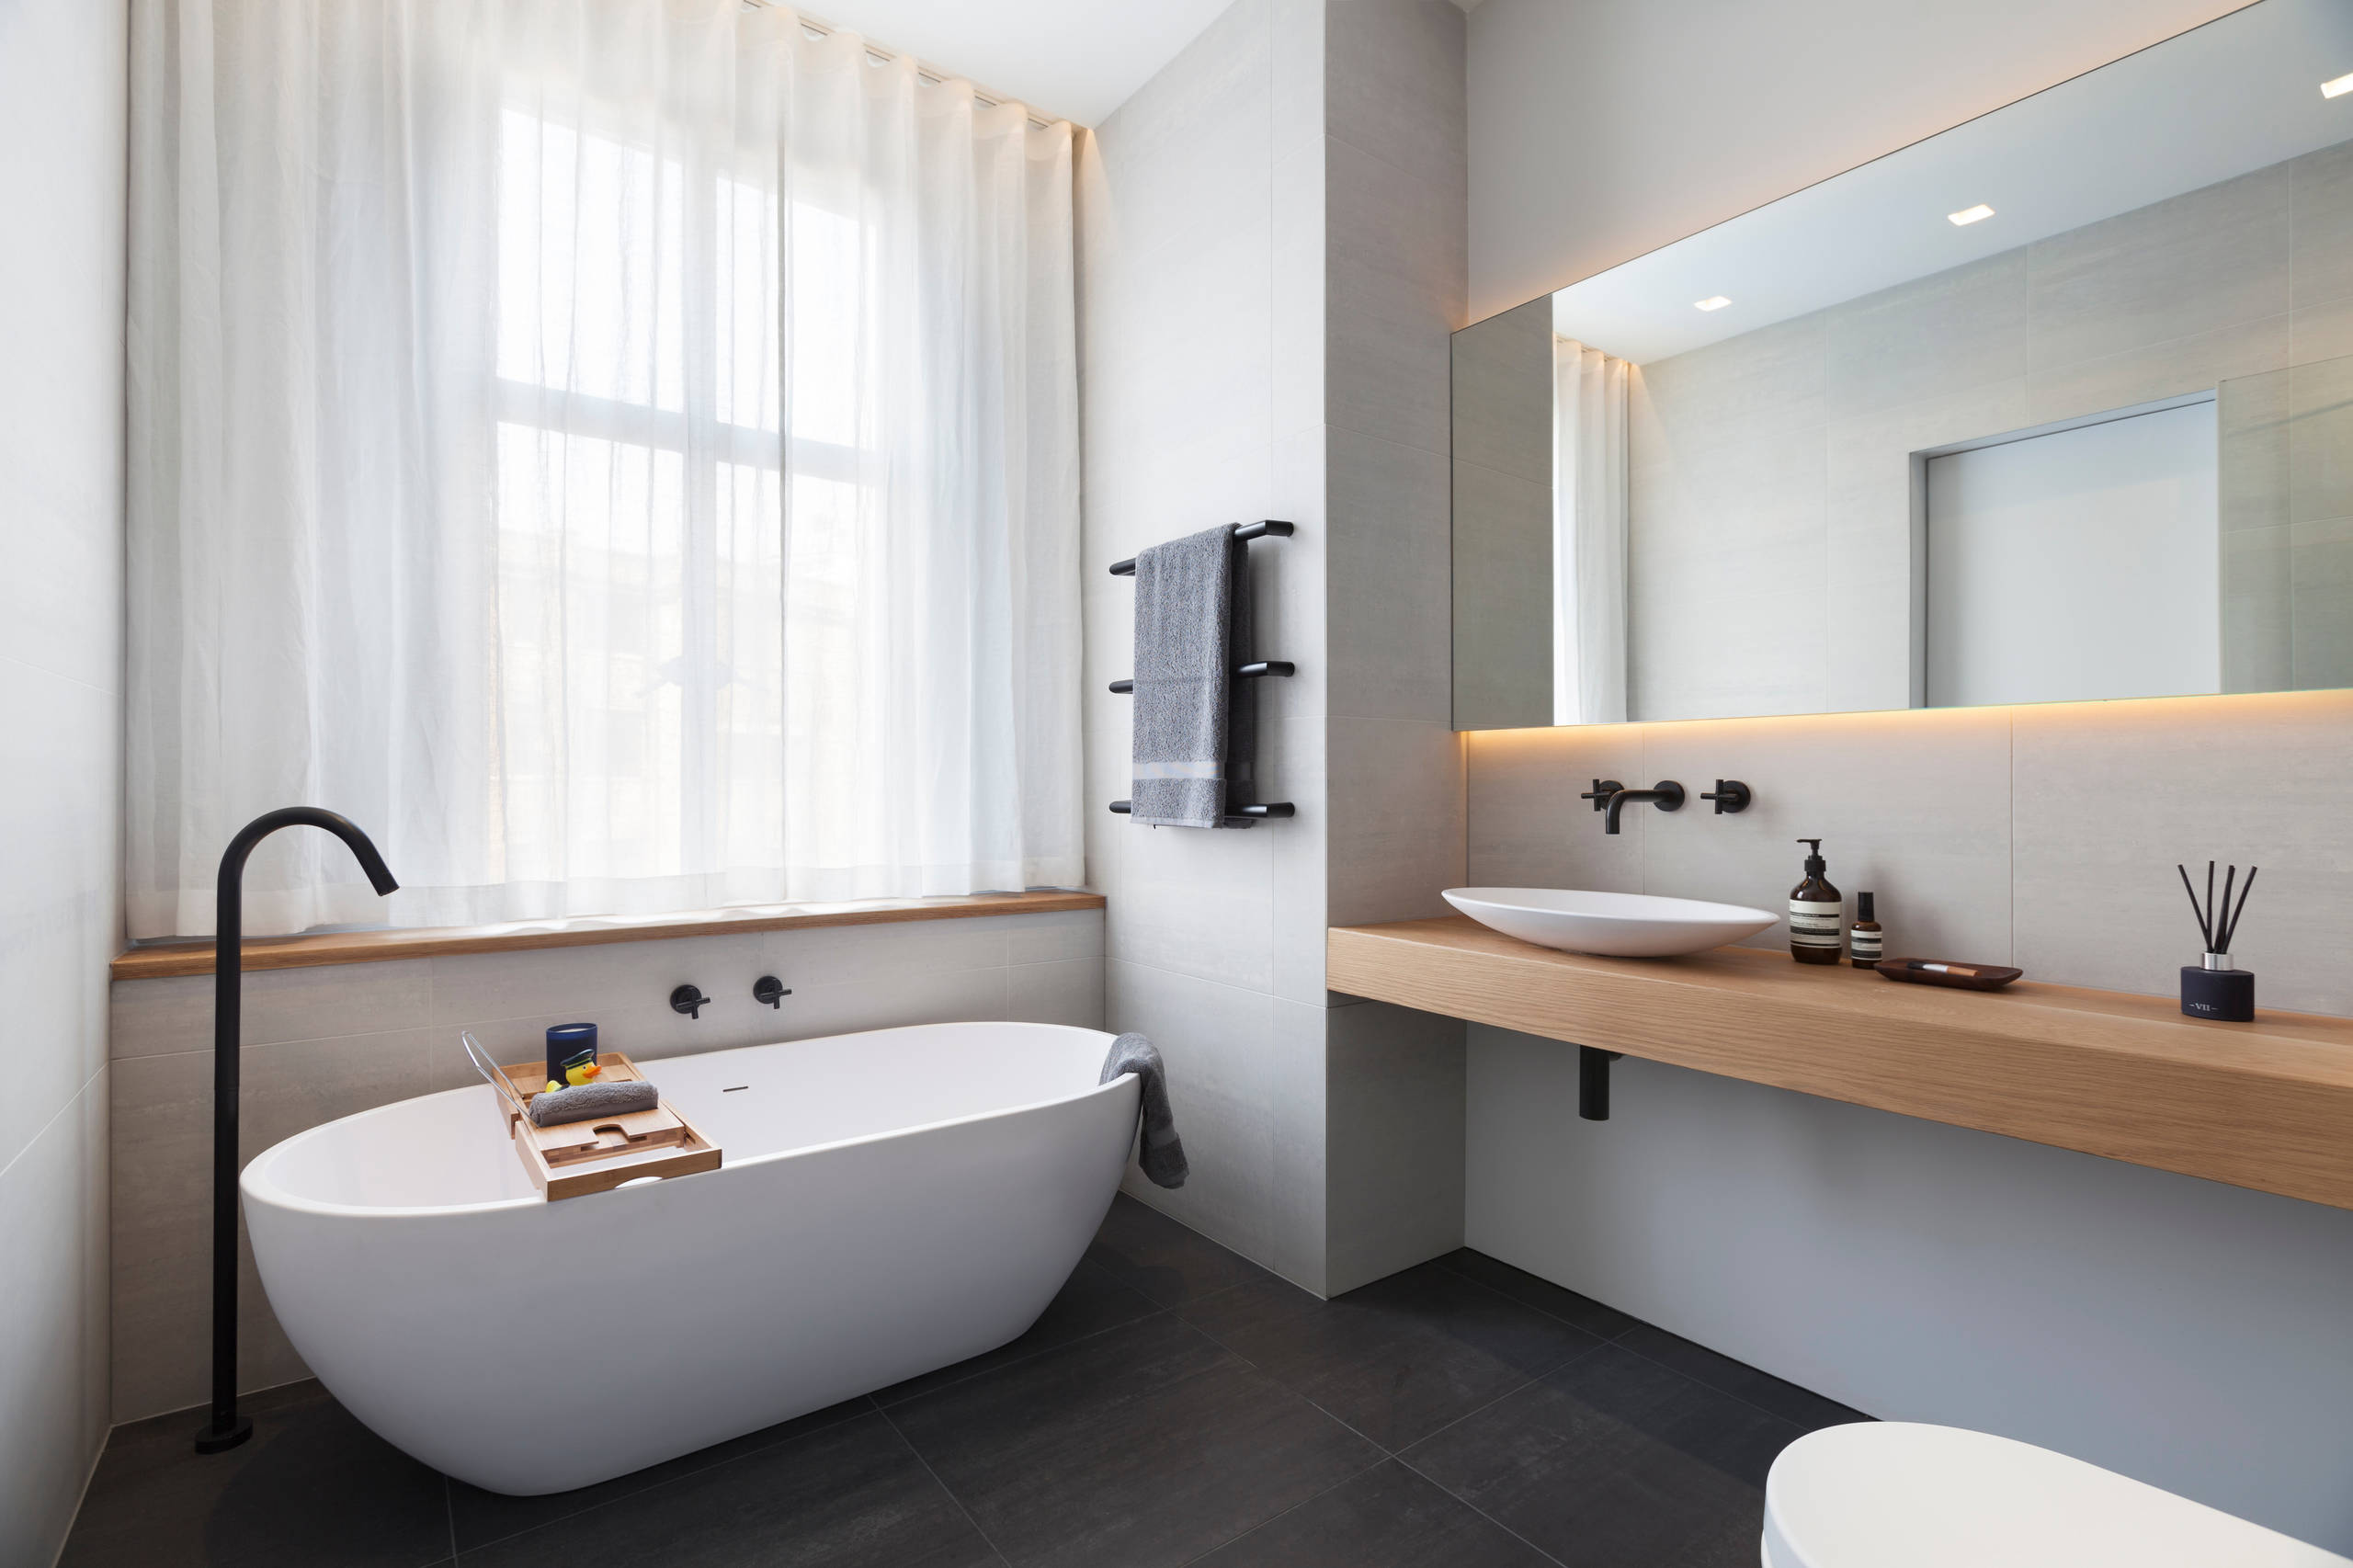 Ask an Expert: What Are the Best Ways to Light My Bathroom? | Houzz UK